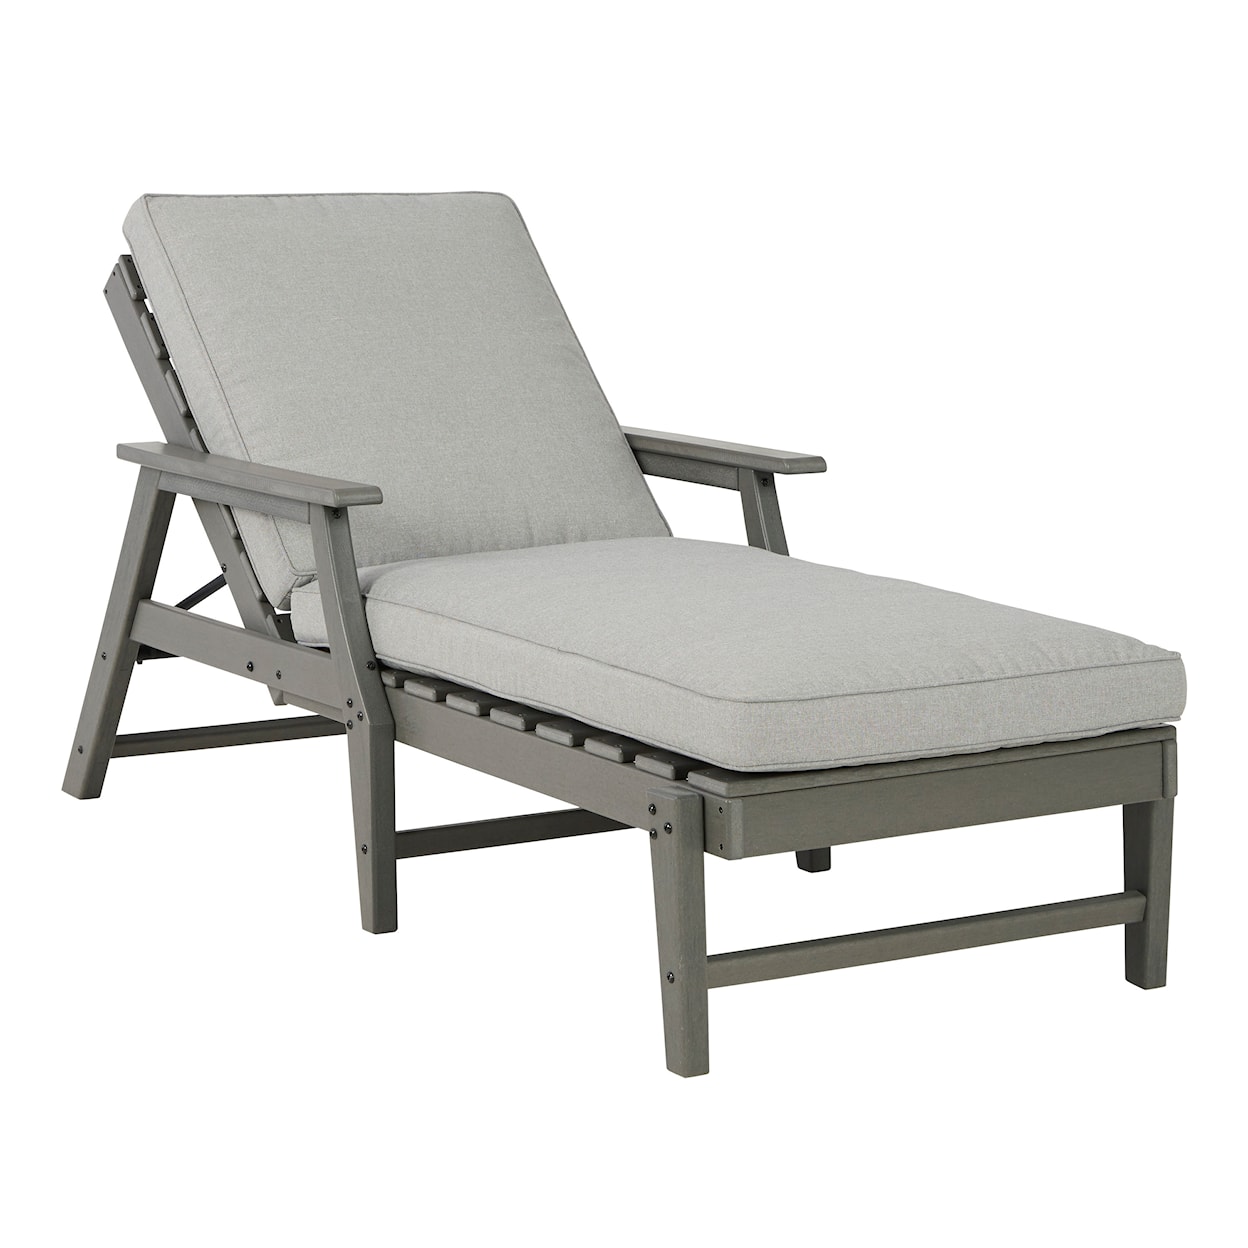 Benchcraft Visola Chaise Lounge with Cushion